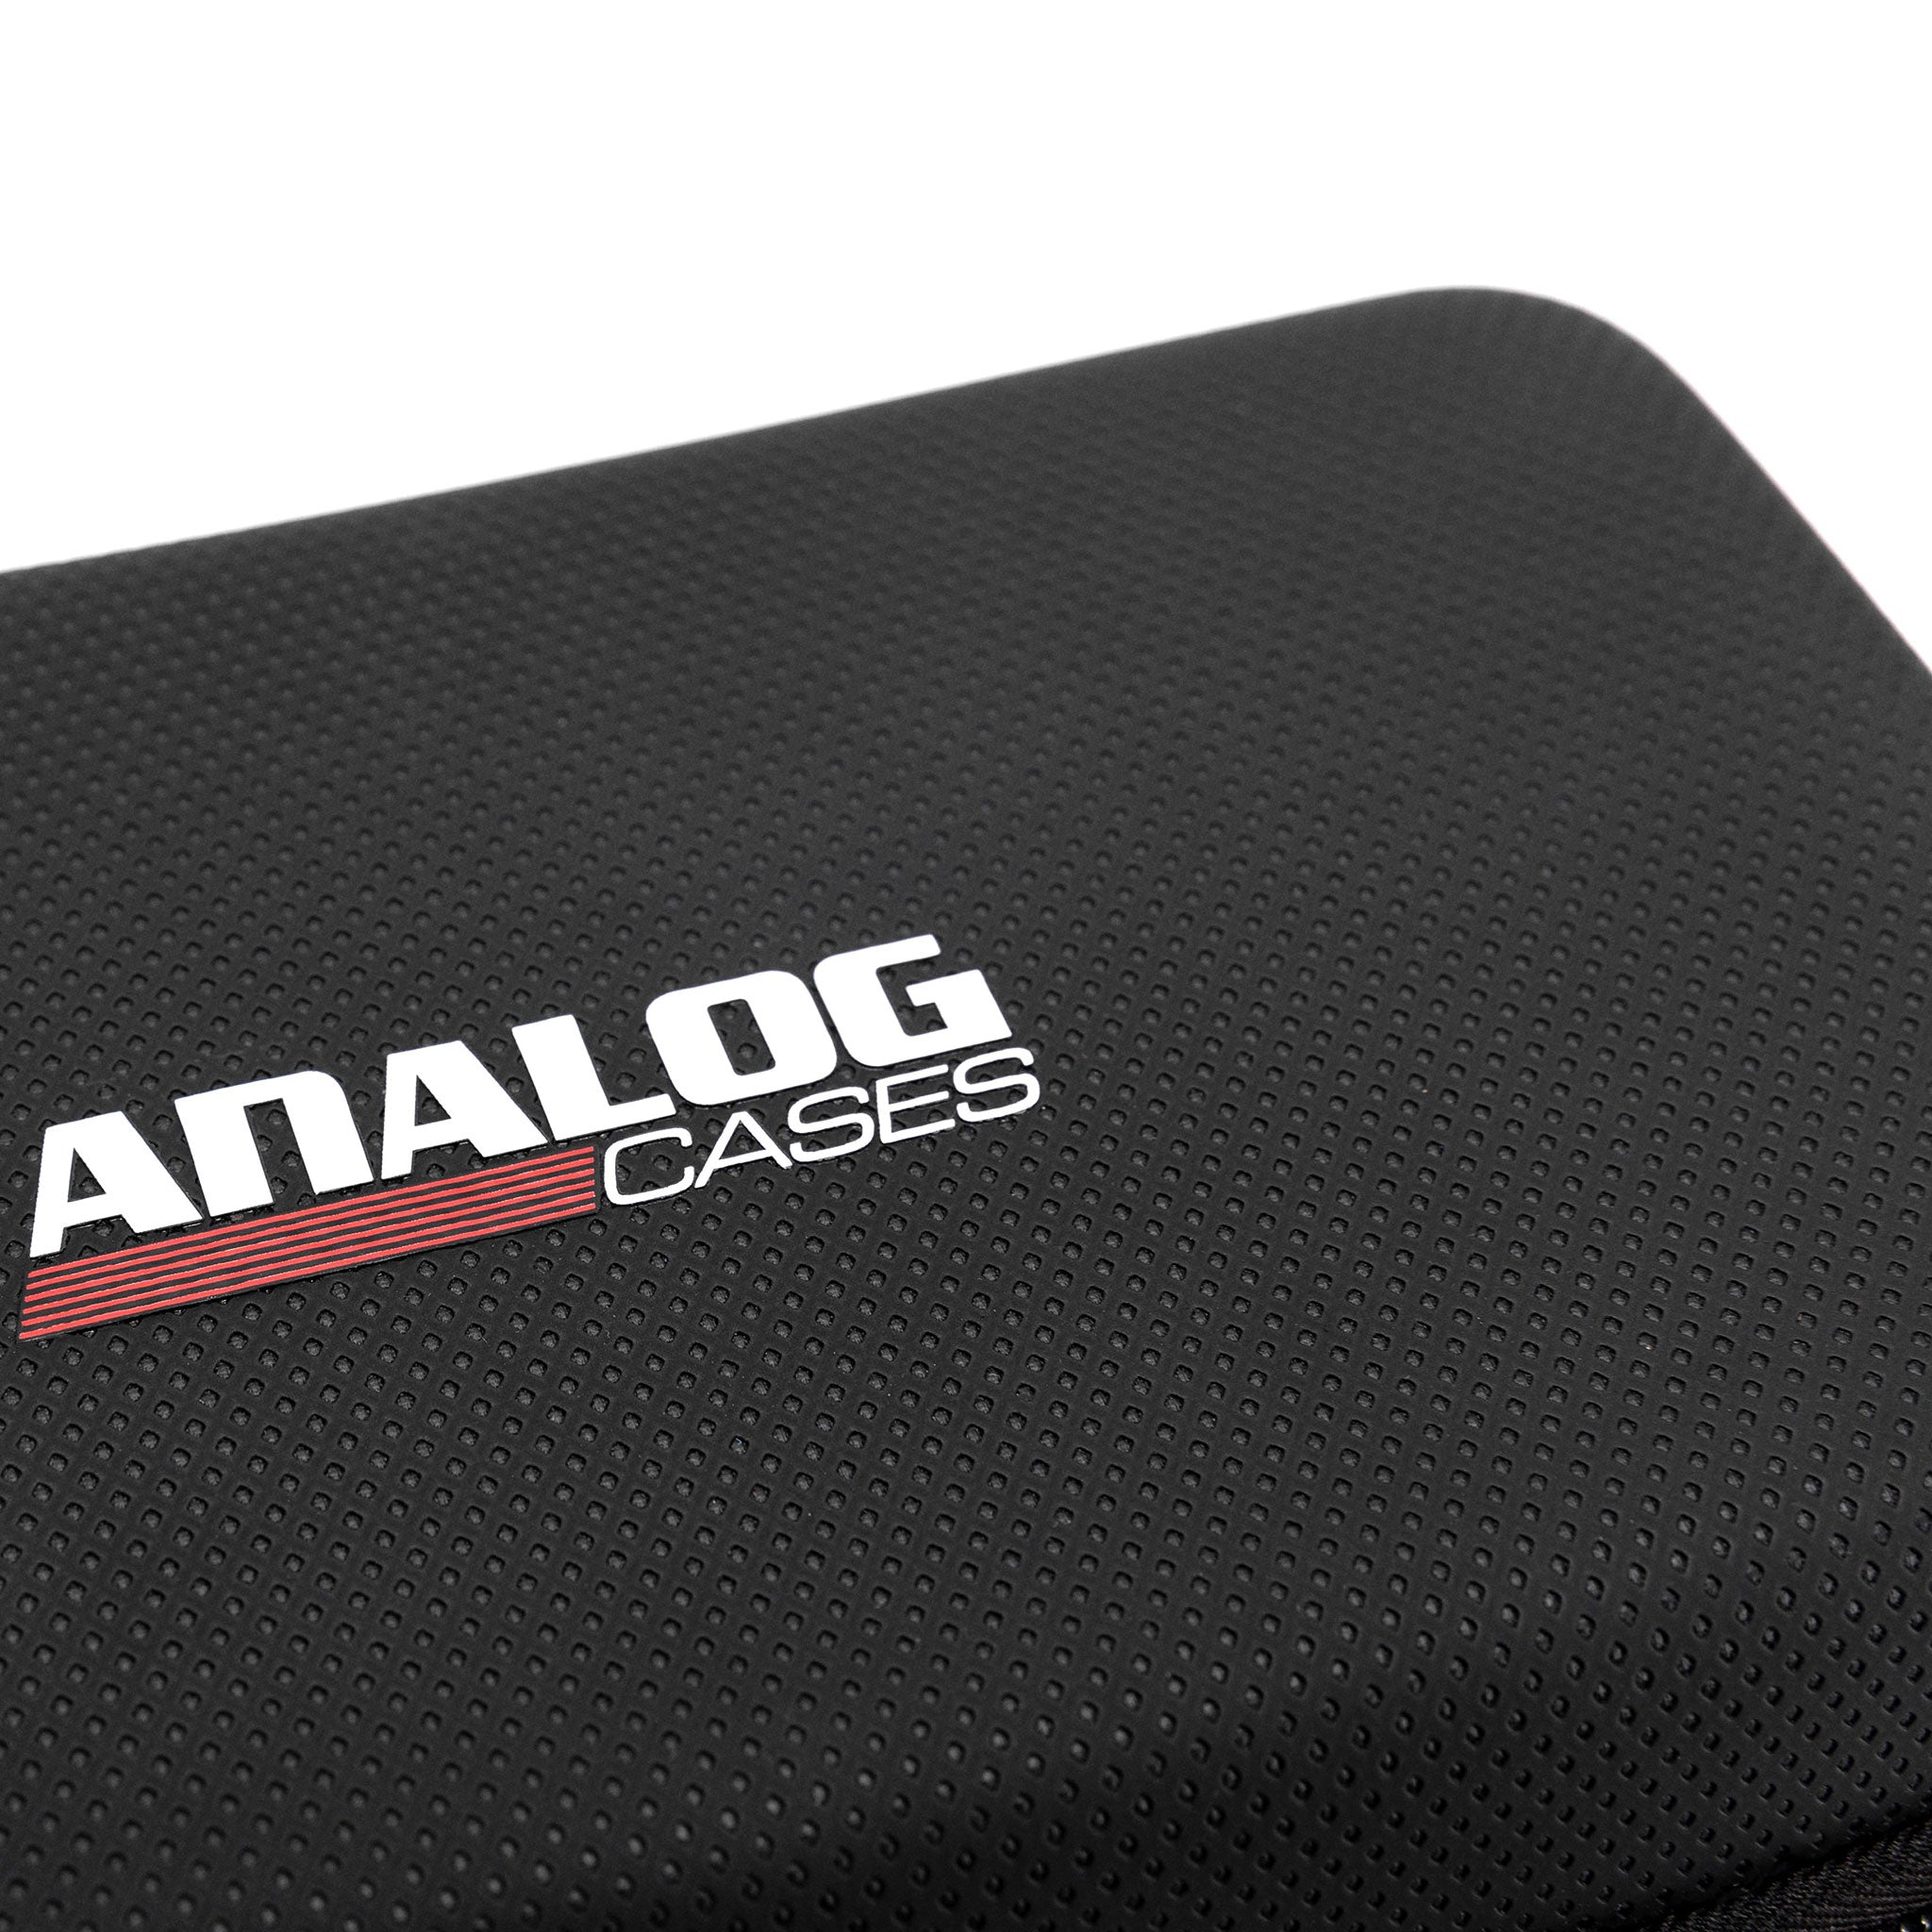 GLIDE Case For The 1010music Blackbox or Bluebox